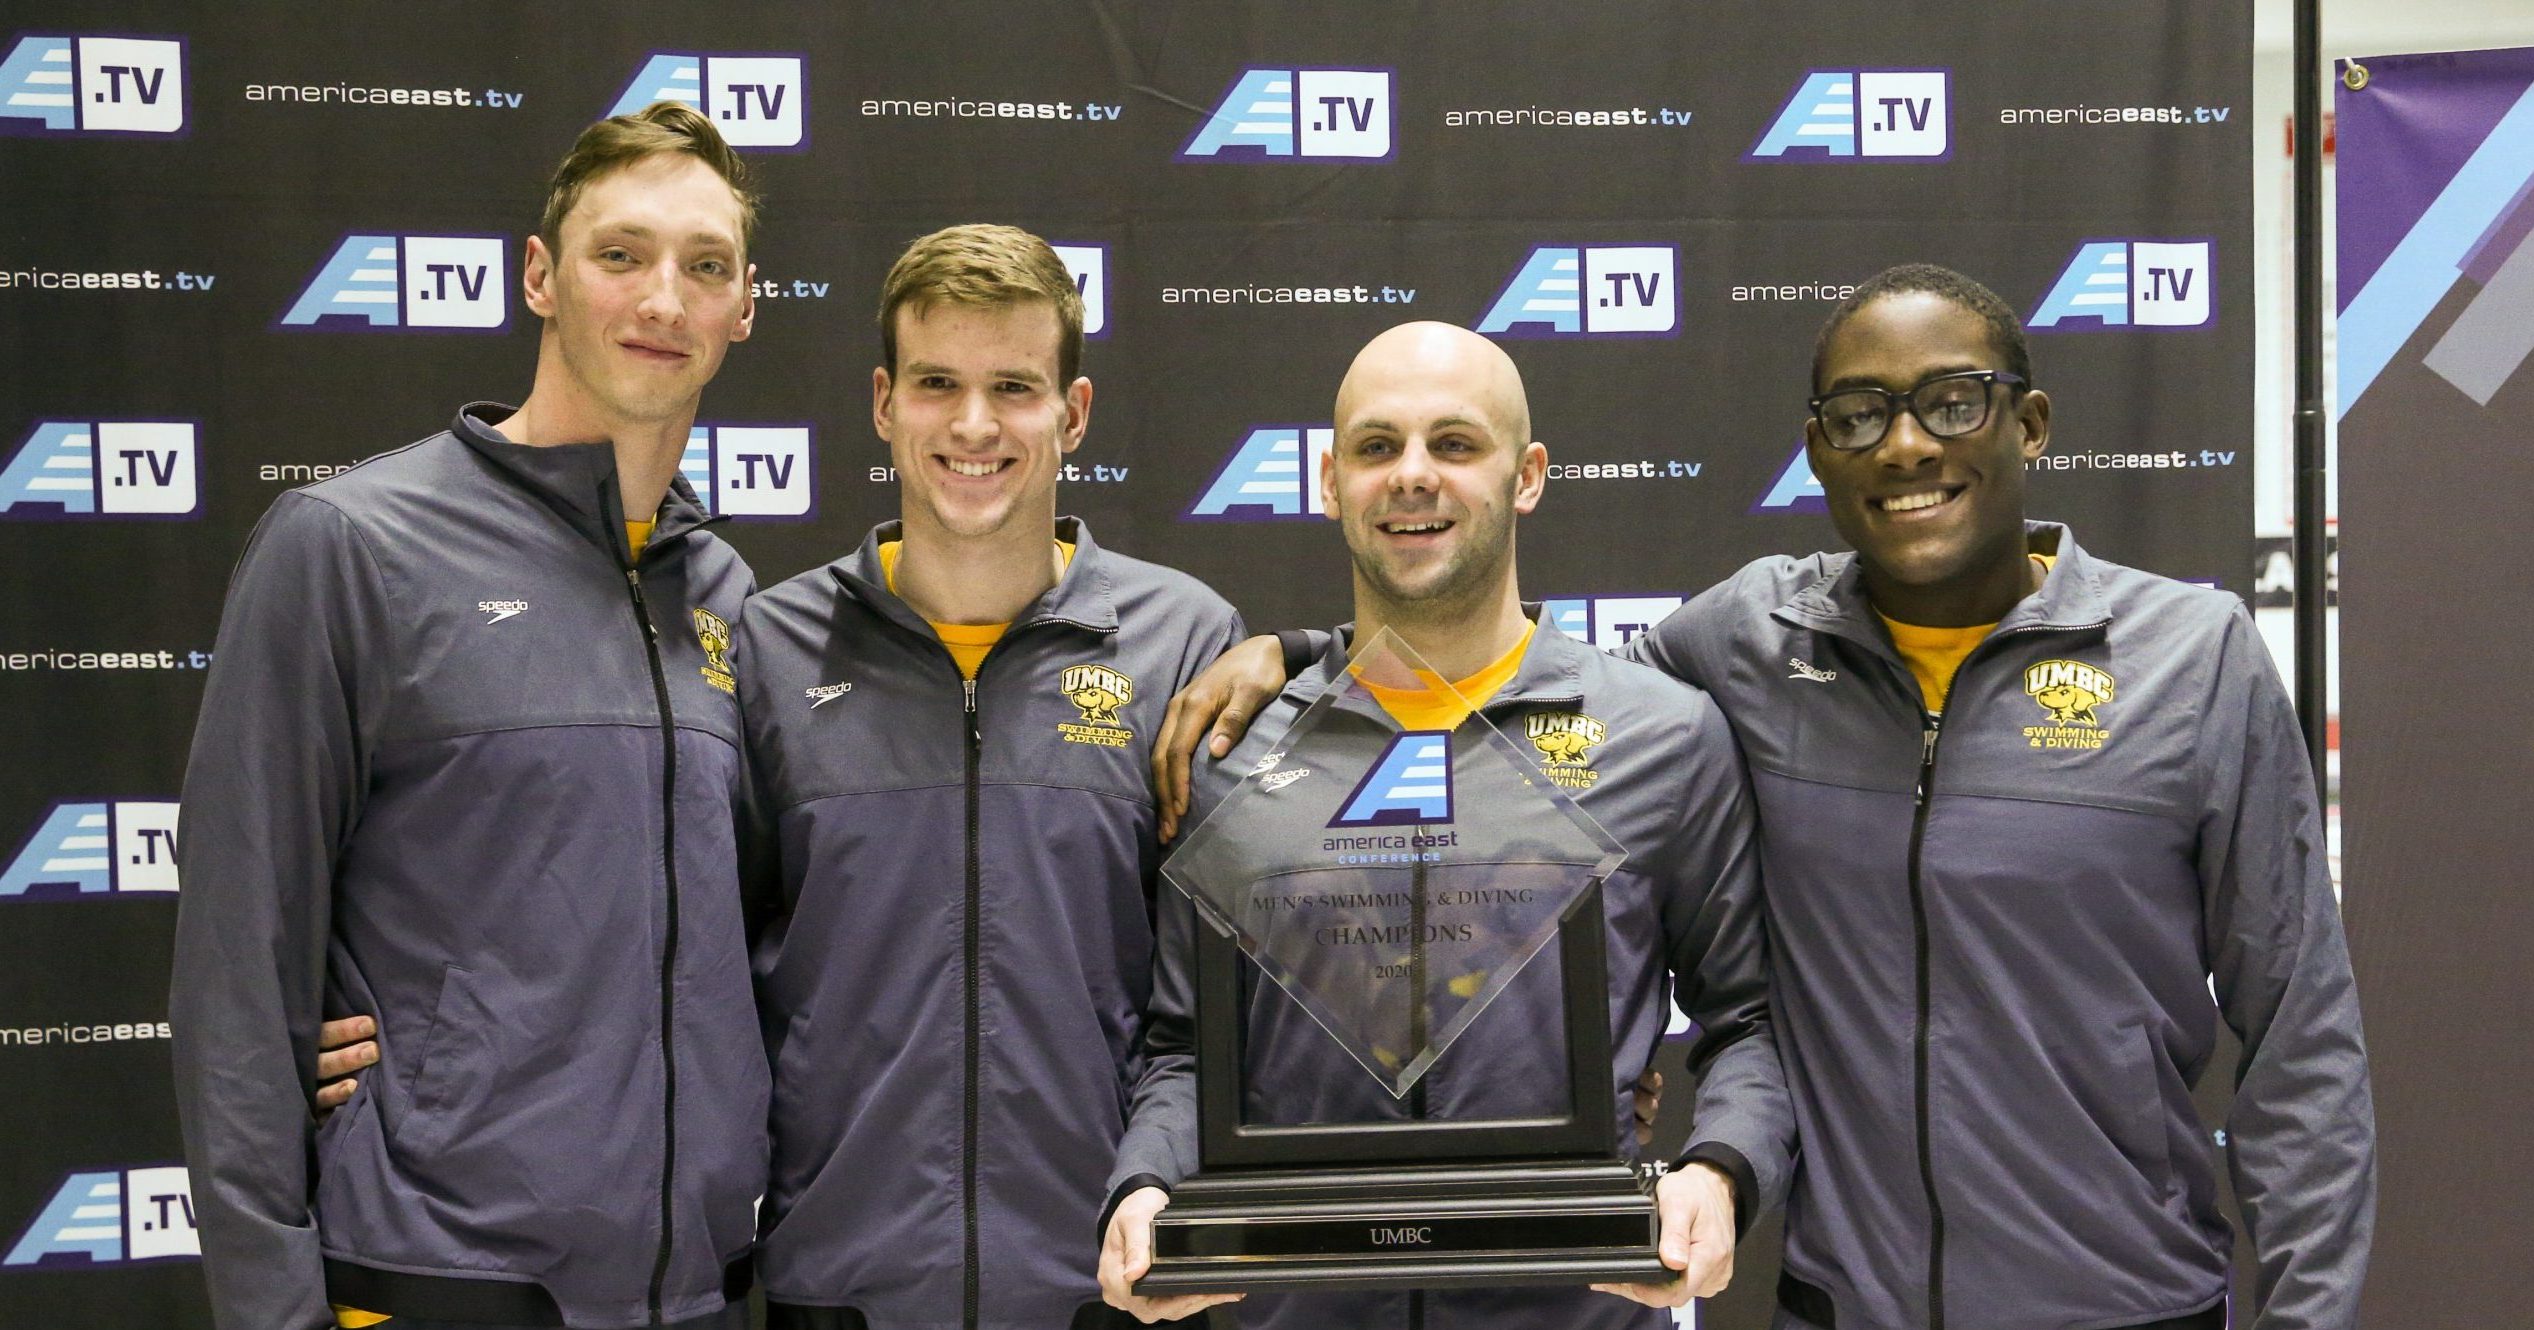 UMBC men’s swimming and diving named America East champions, women’s team captures 2nd place